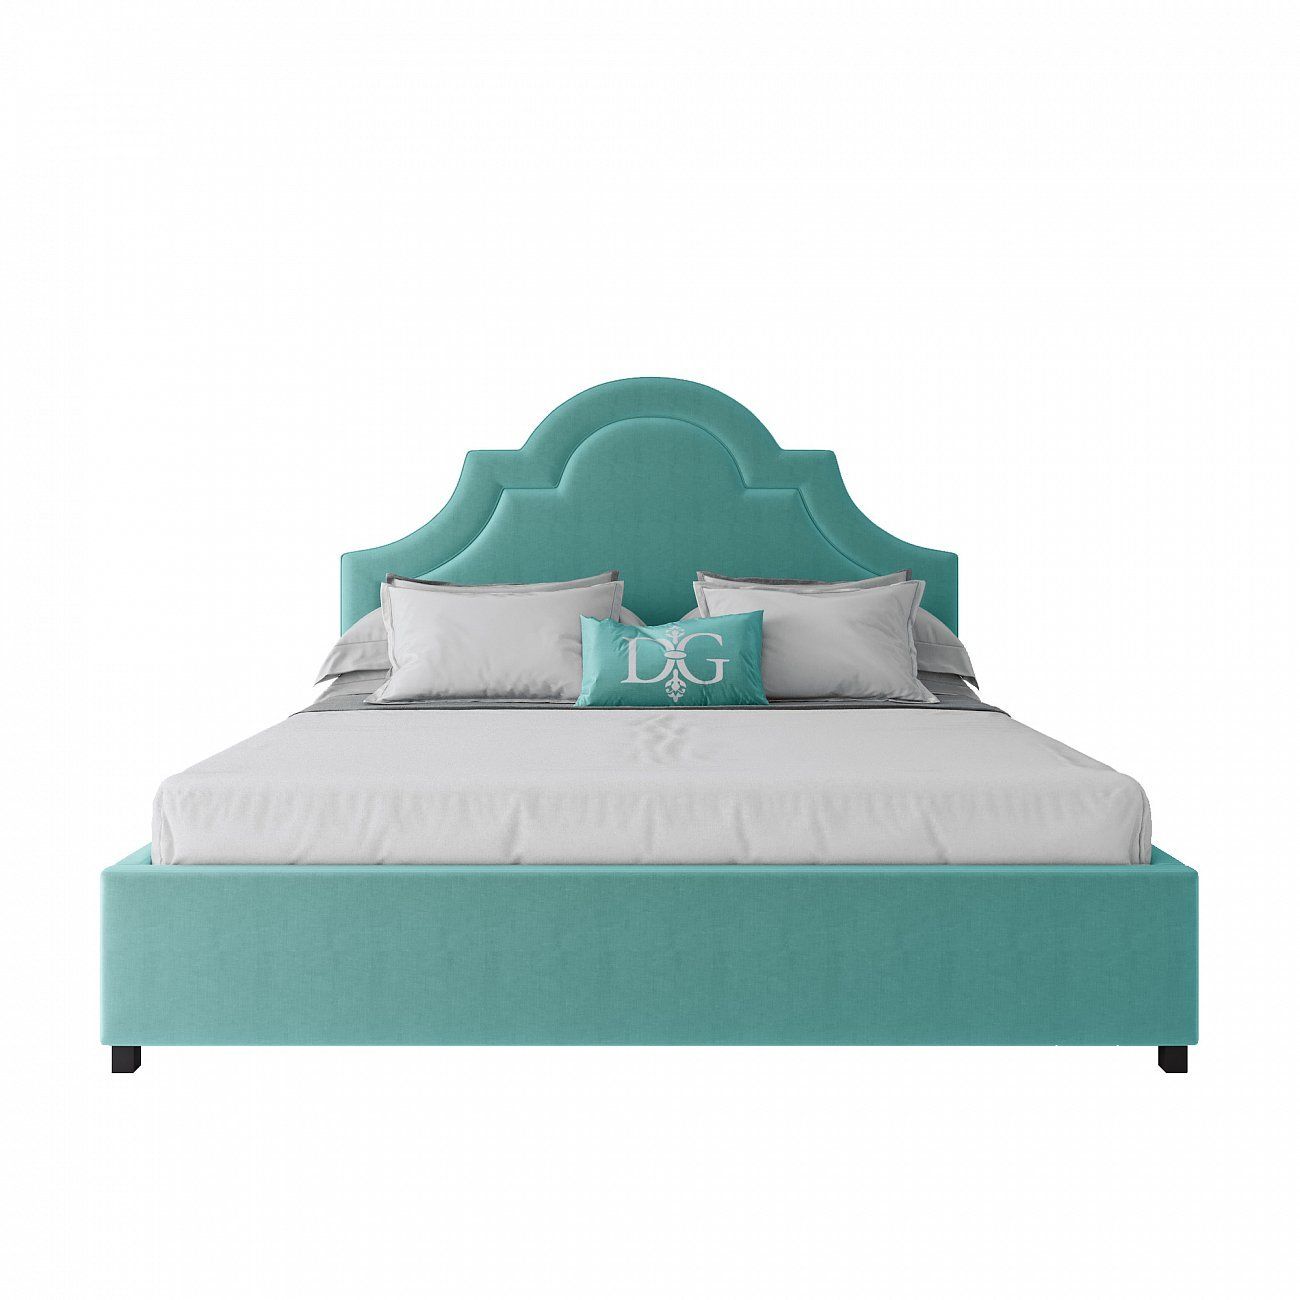 Double bed 180x200 turquoise Kennedy